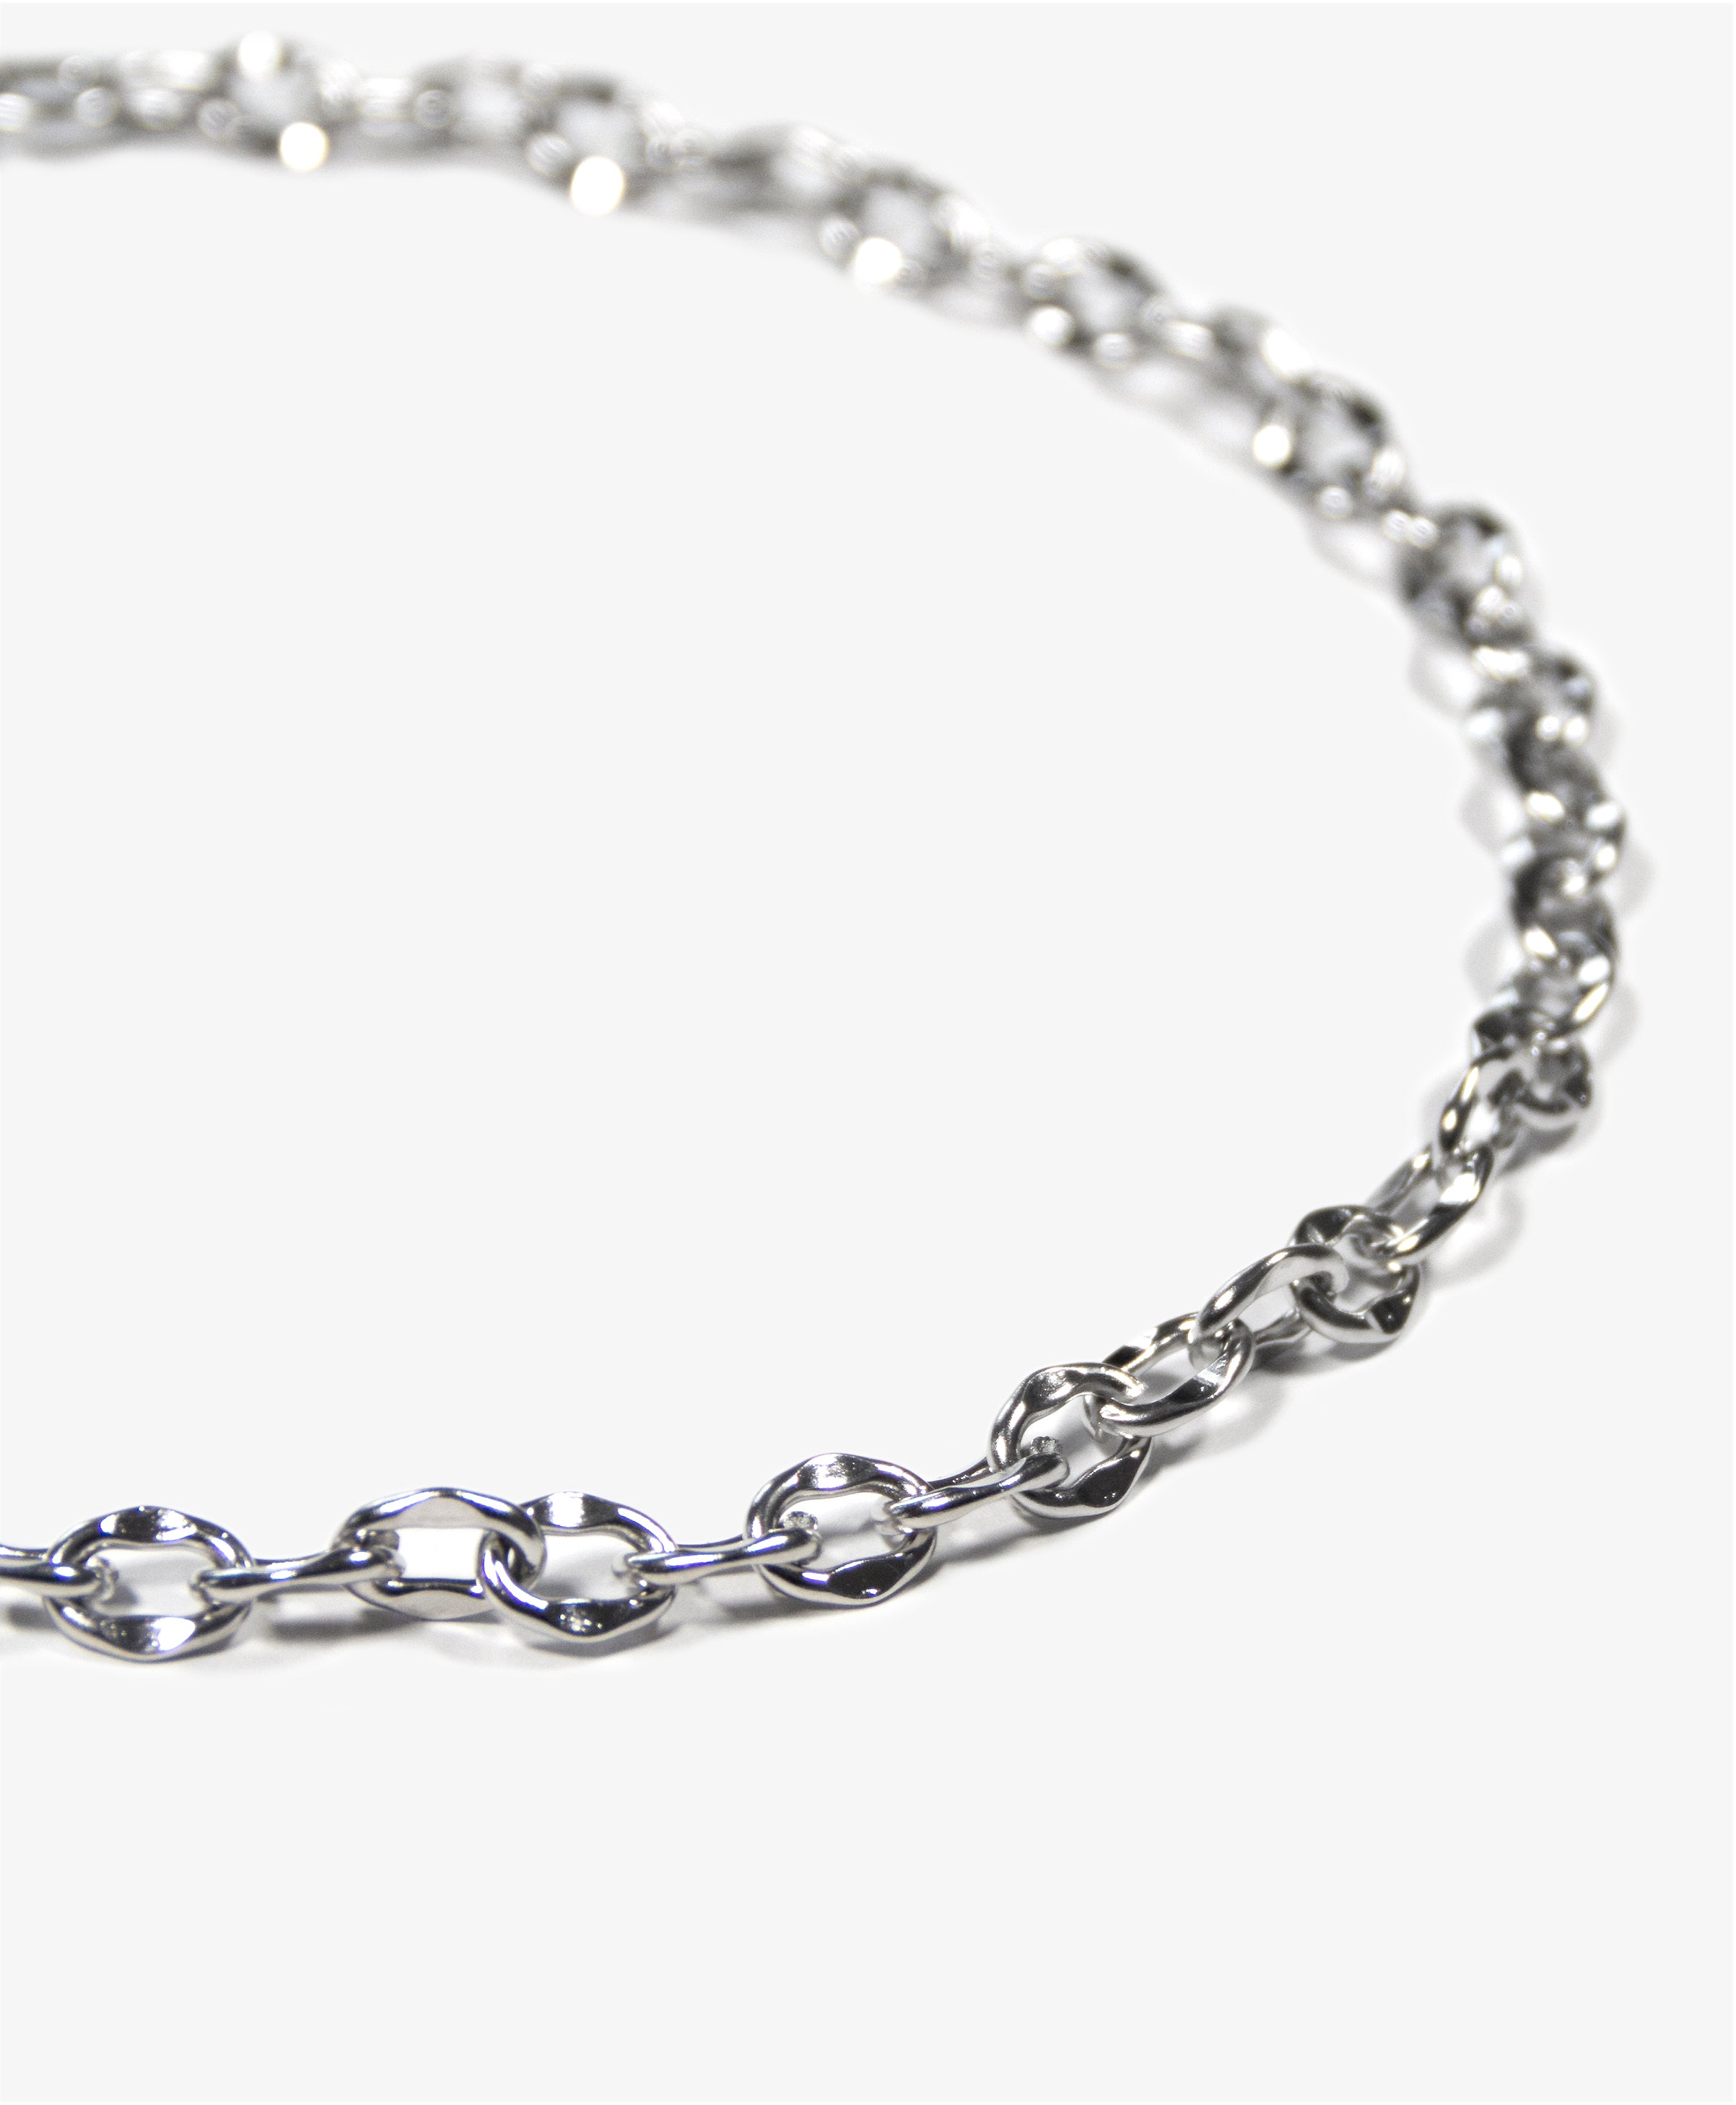 llayers-mens-women-jewelry-silver-stainlesssteel-choker-chain-necklace-unchained-008-Brooklyn-New-York-2